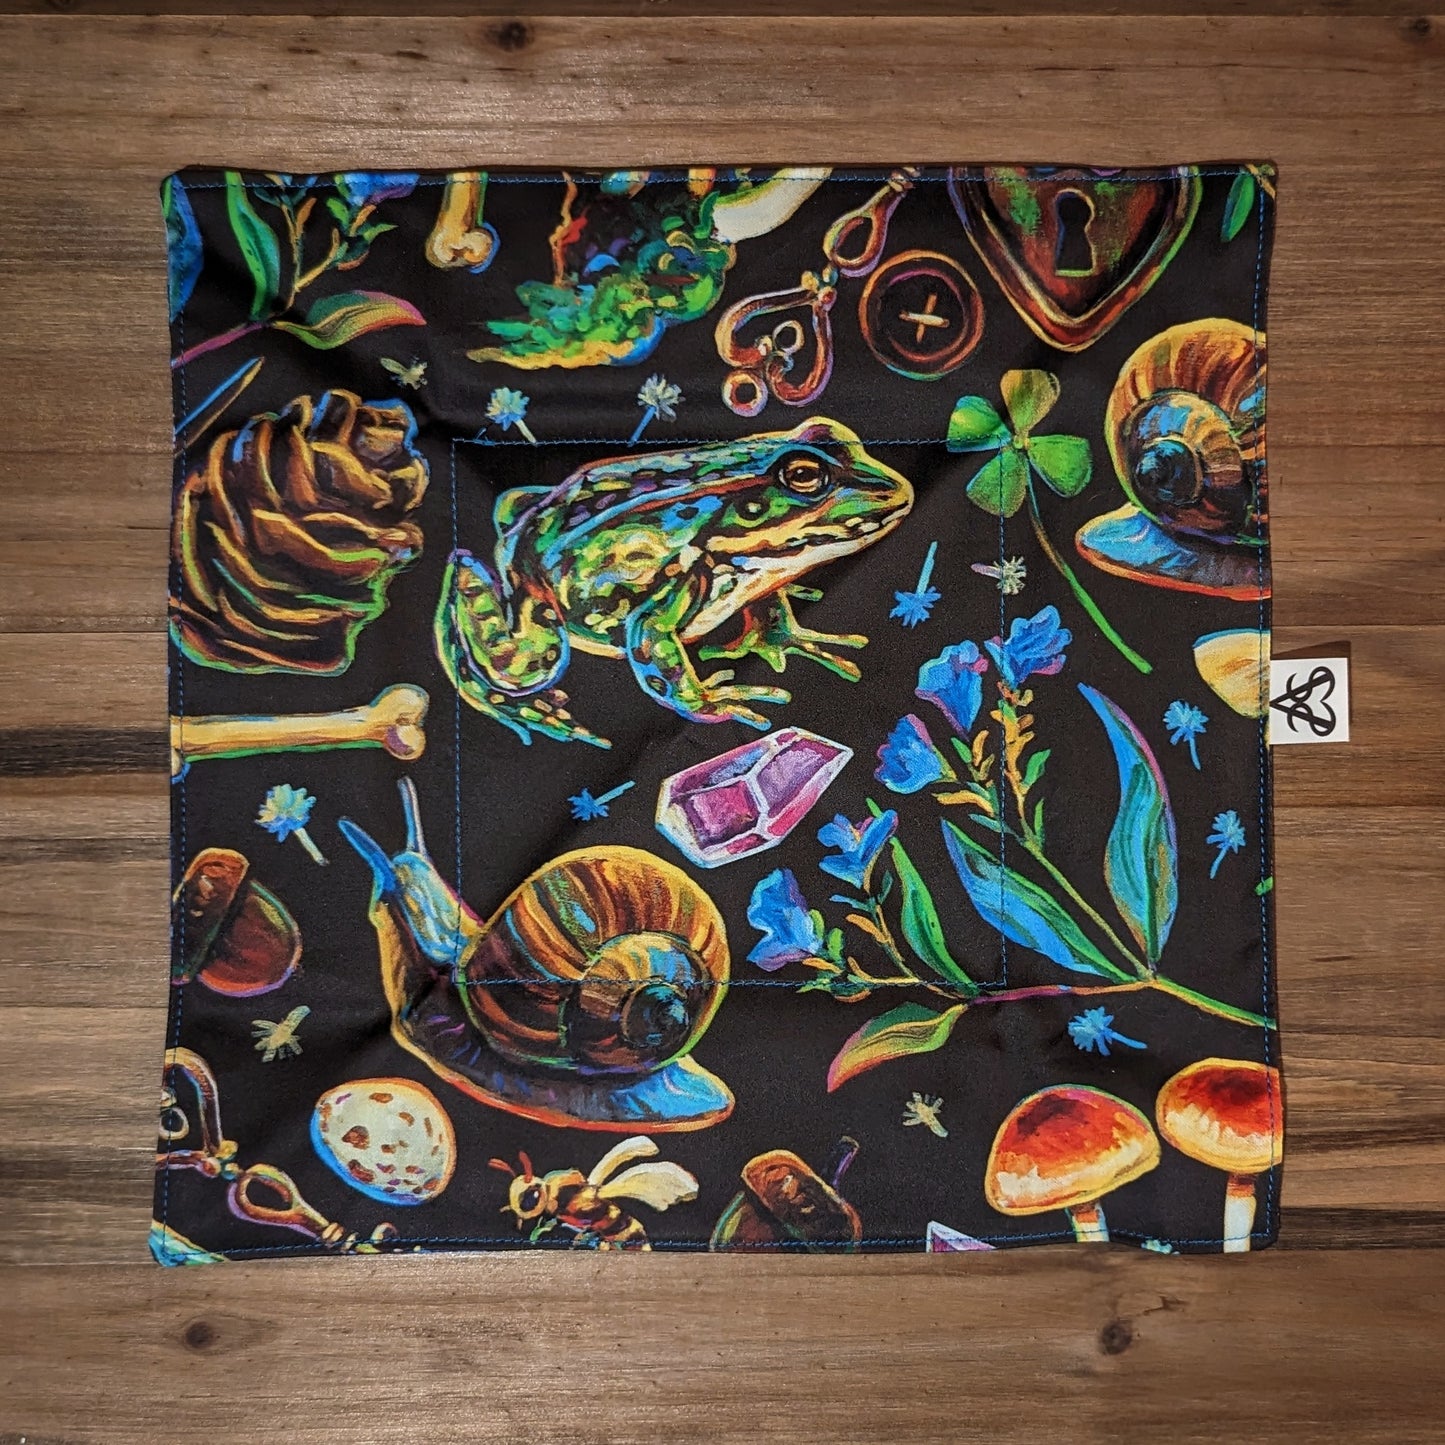 The witch's forest tray laid flat to show the entire colorful forest design on the first side with a frog, keys, bees, snails, crystals, mushrooms, pinecones, four leaf clovers, eggs, button, and blue flowers - accented with bright blue stitching.